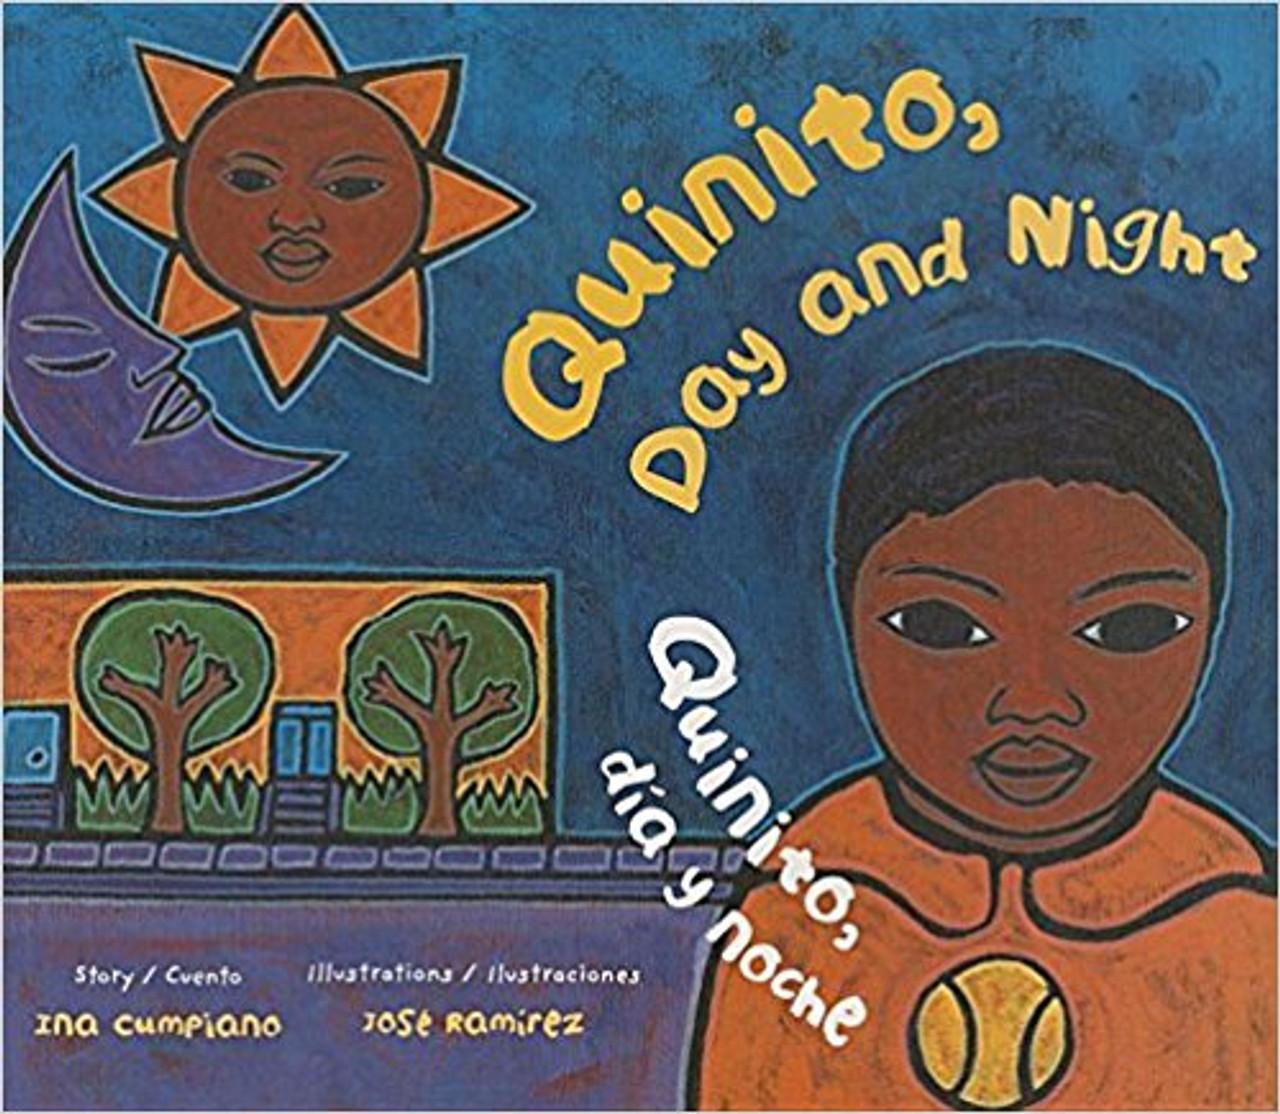 Little Quinito and his family take the reader through a day filled with opposites, including short/tall, quiet/loud, and rainy/sunny.